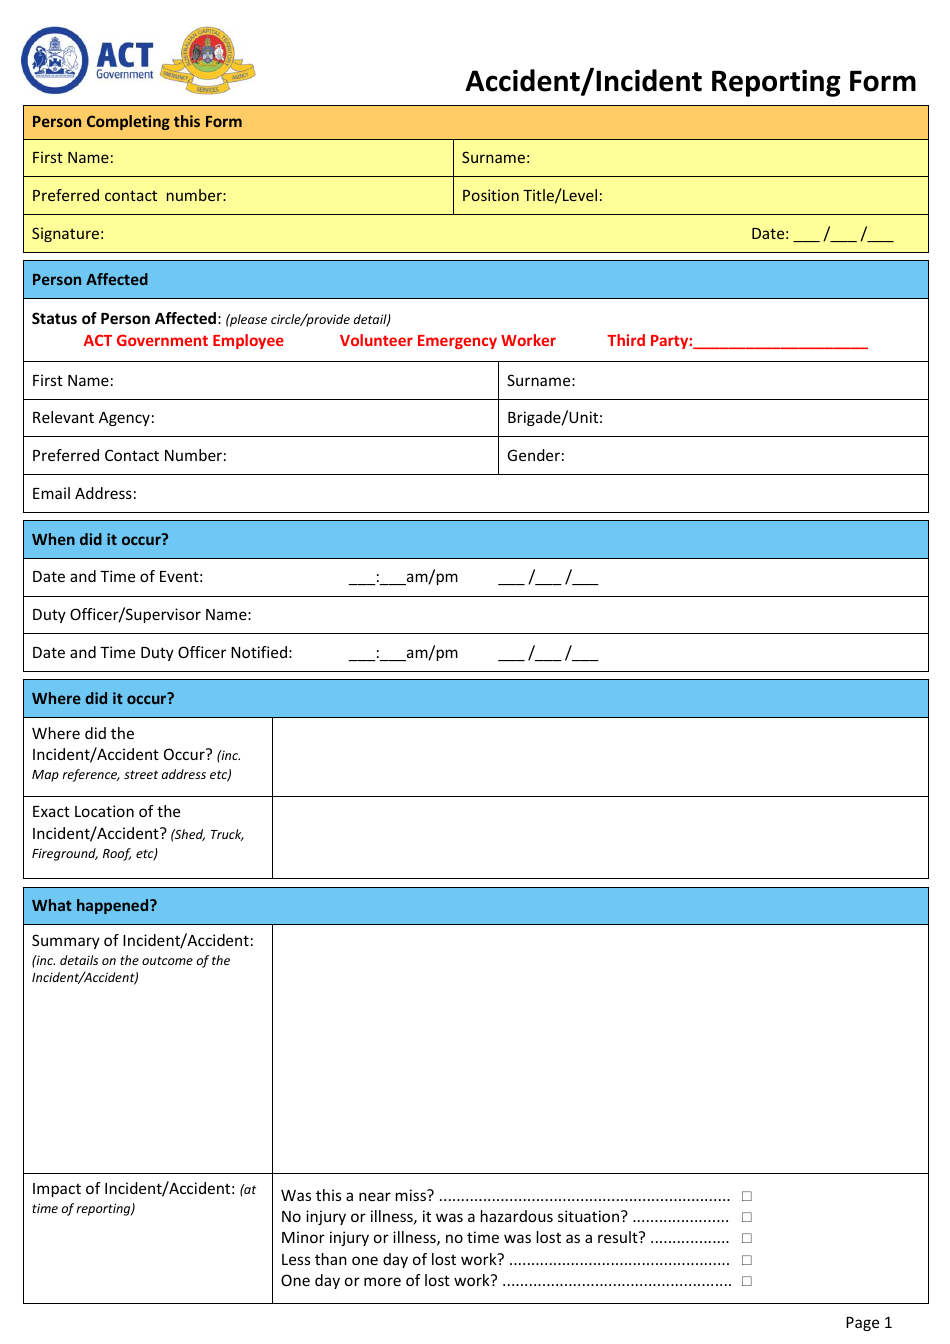 Accident / Incident Reporting Form - Australia, Page 1